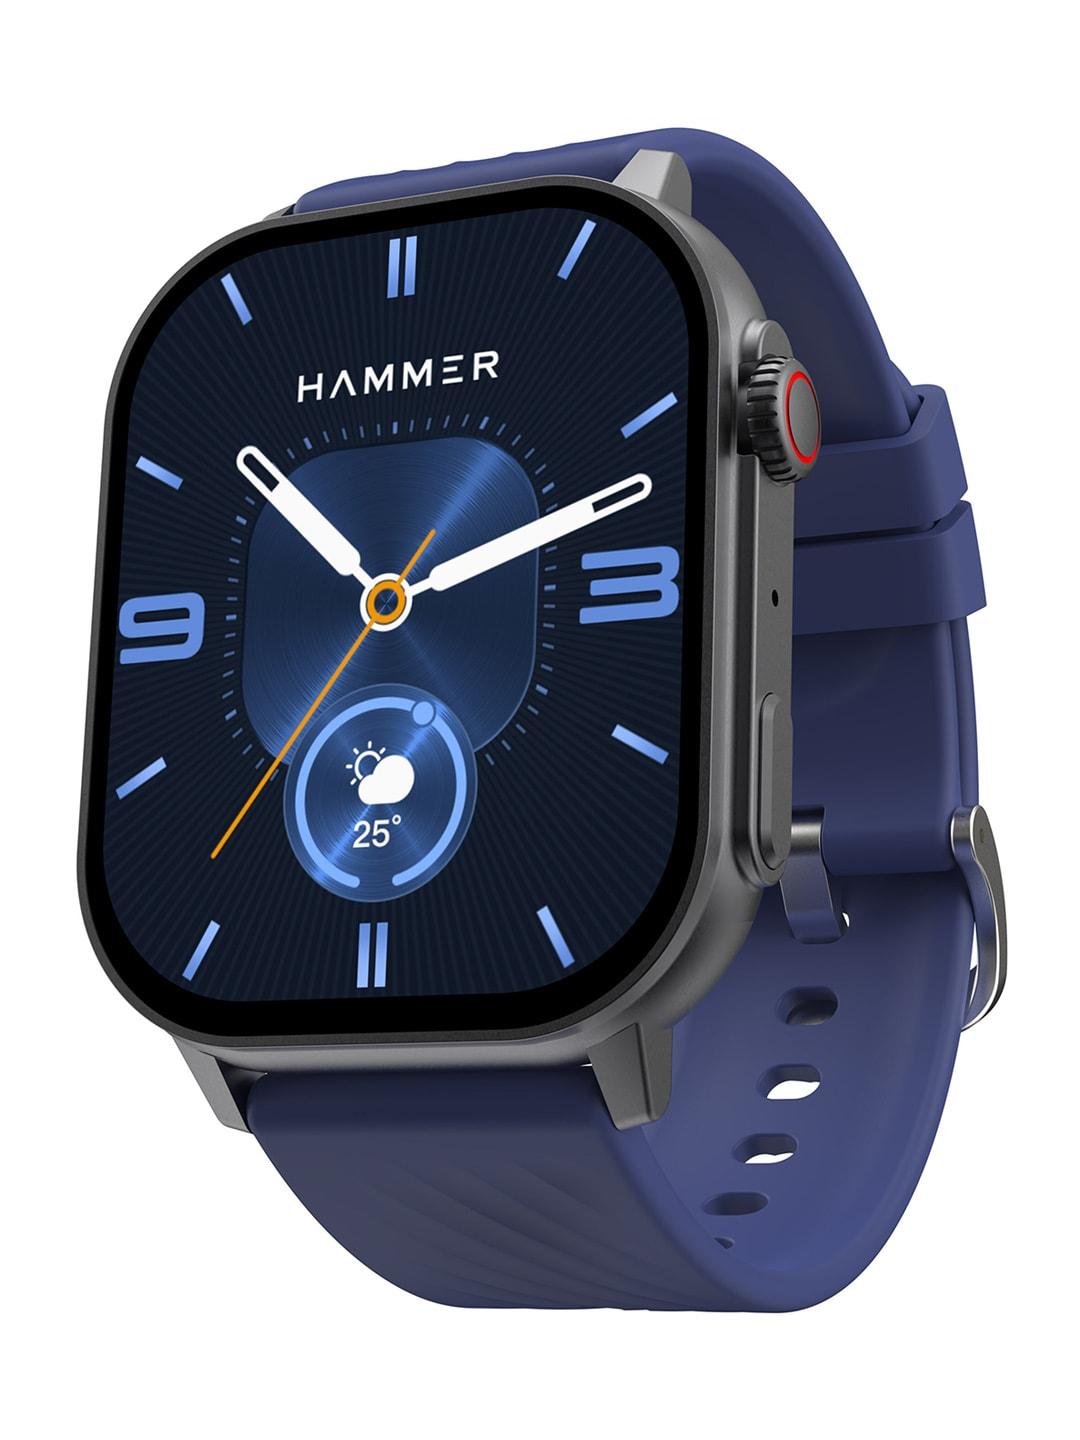 hammer midnight blue arctic 2.04 inch super amoled smart watch with ai voice assistant